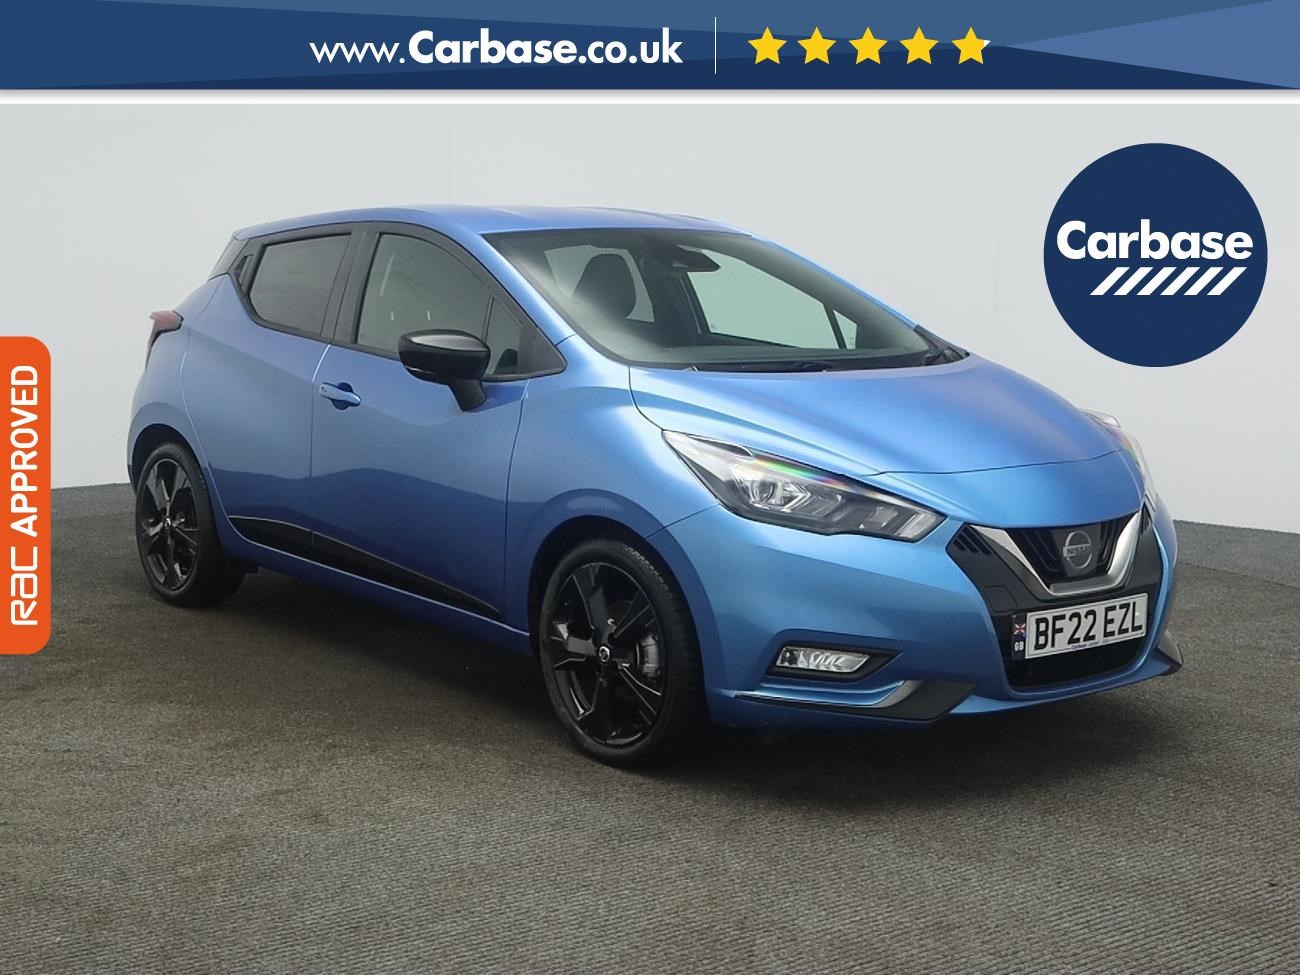 The Car Guide's 2019 Best Buys: Nissan Micra - The Car Guide